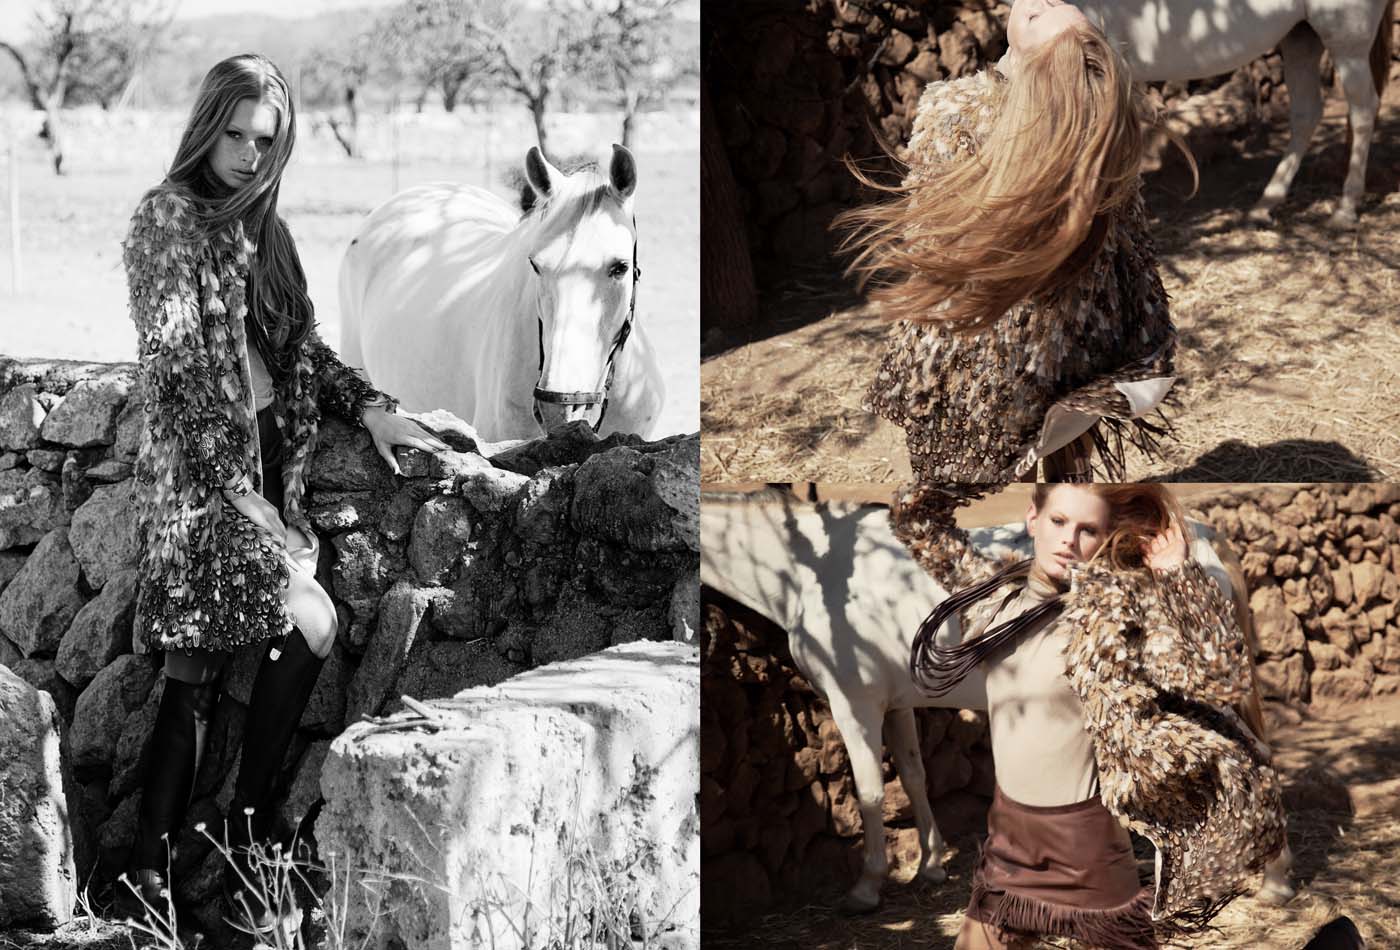 La Cavalière masquée | Andreas Ortner for Equistyle Magazine Winter 2011/2012: Into the wild